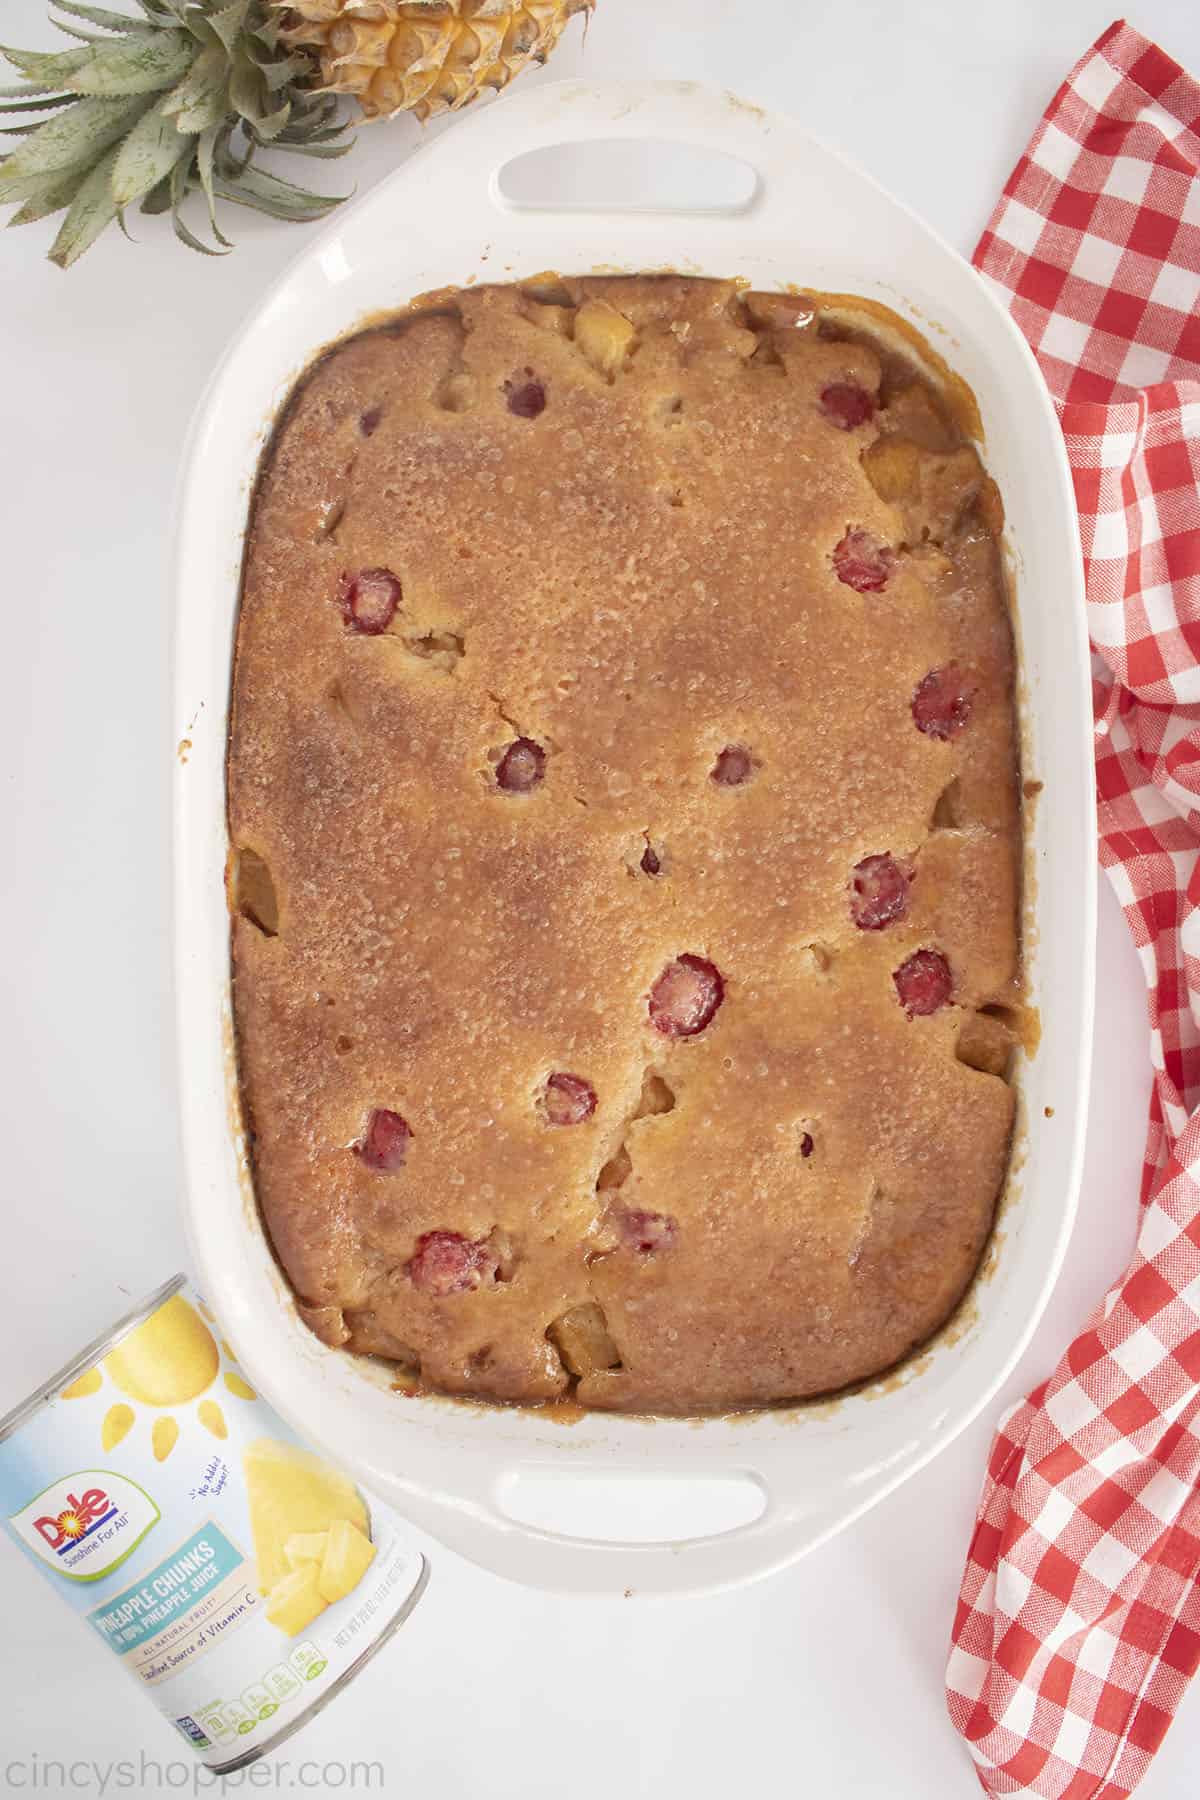 White baking dish with baked pineapple and cherry cobbler.